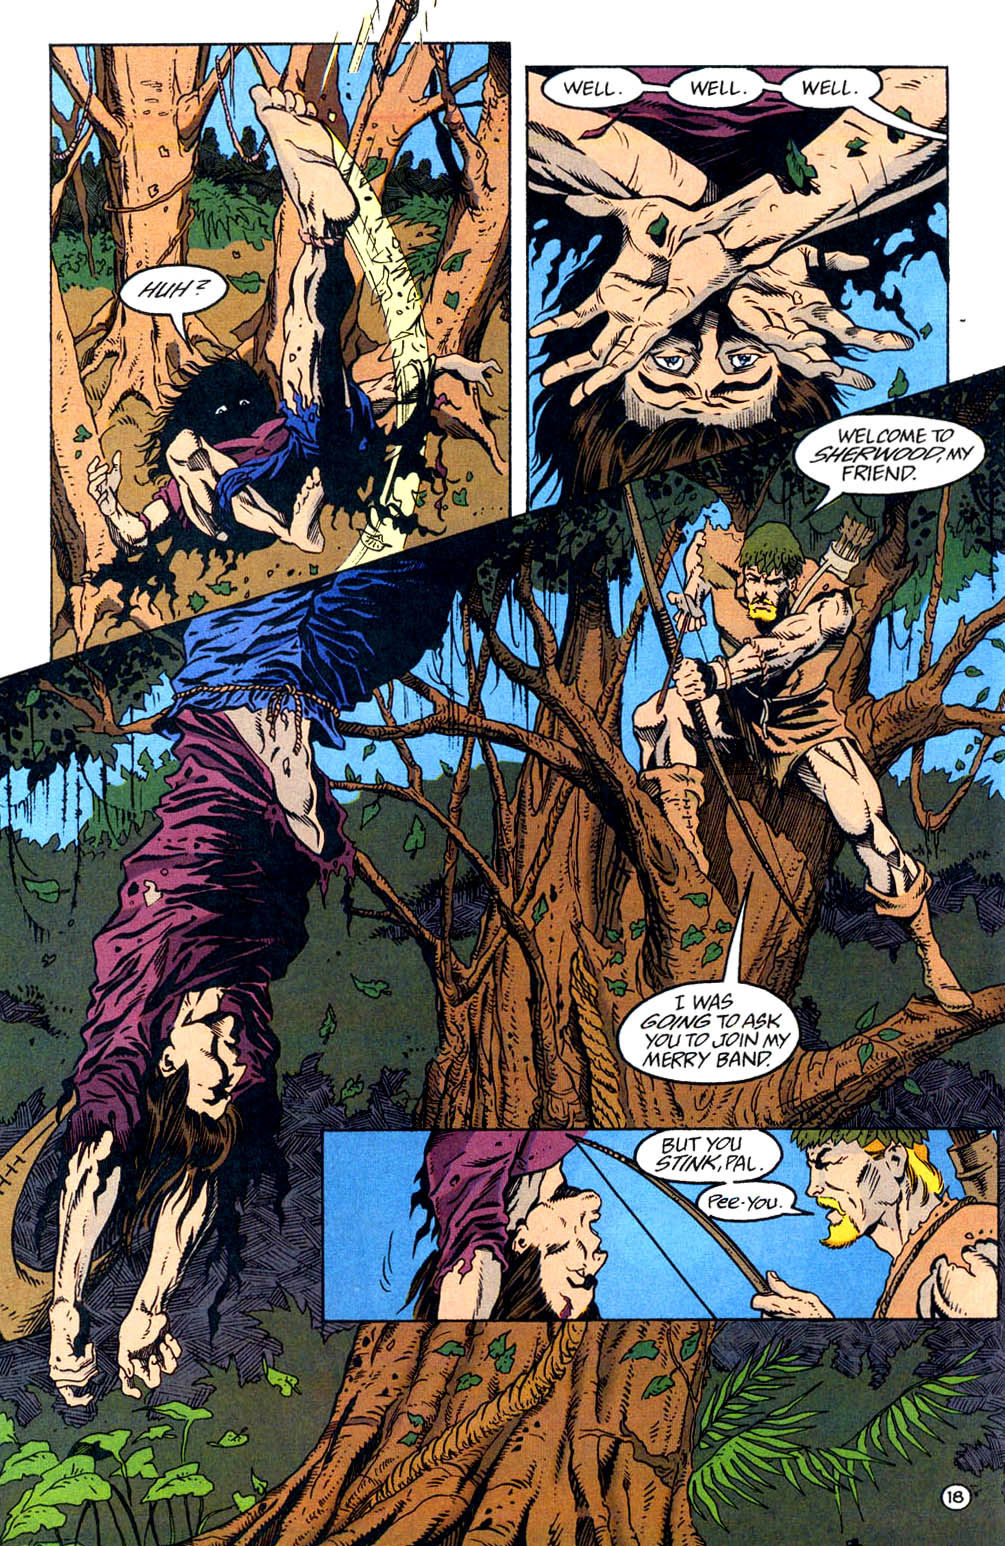 Oliver Queen meets Nicholas Kotero, written by Chuck Dixon and art by Chris Renaud